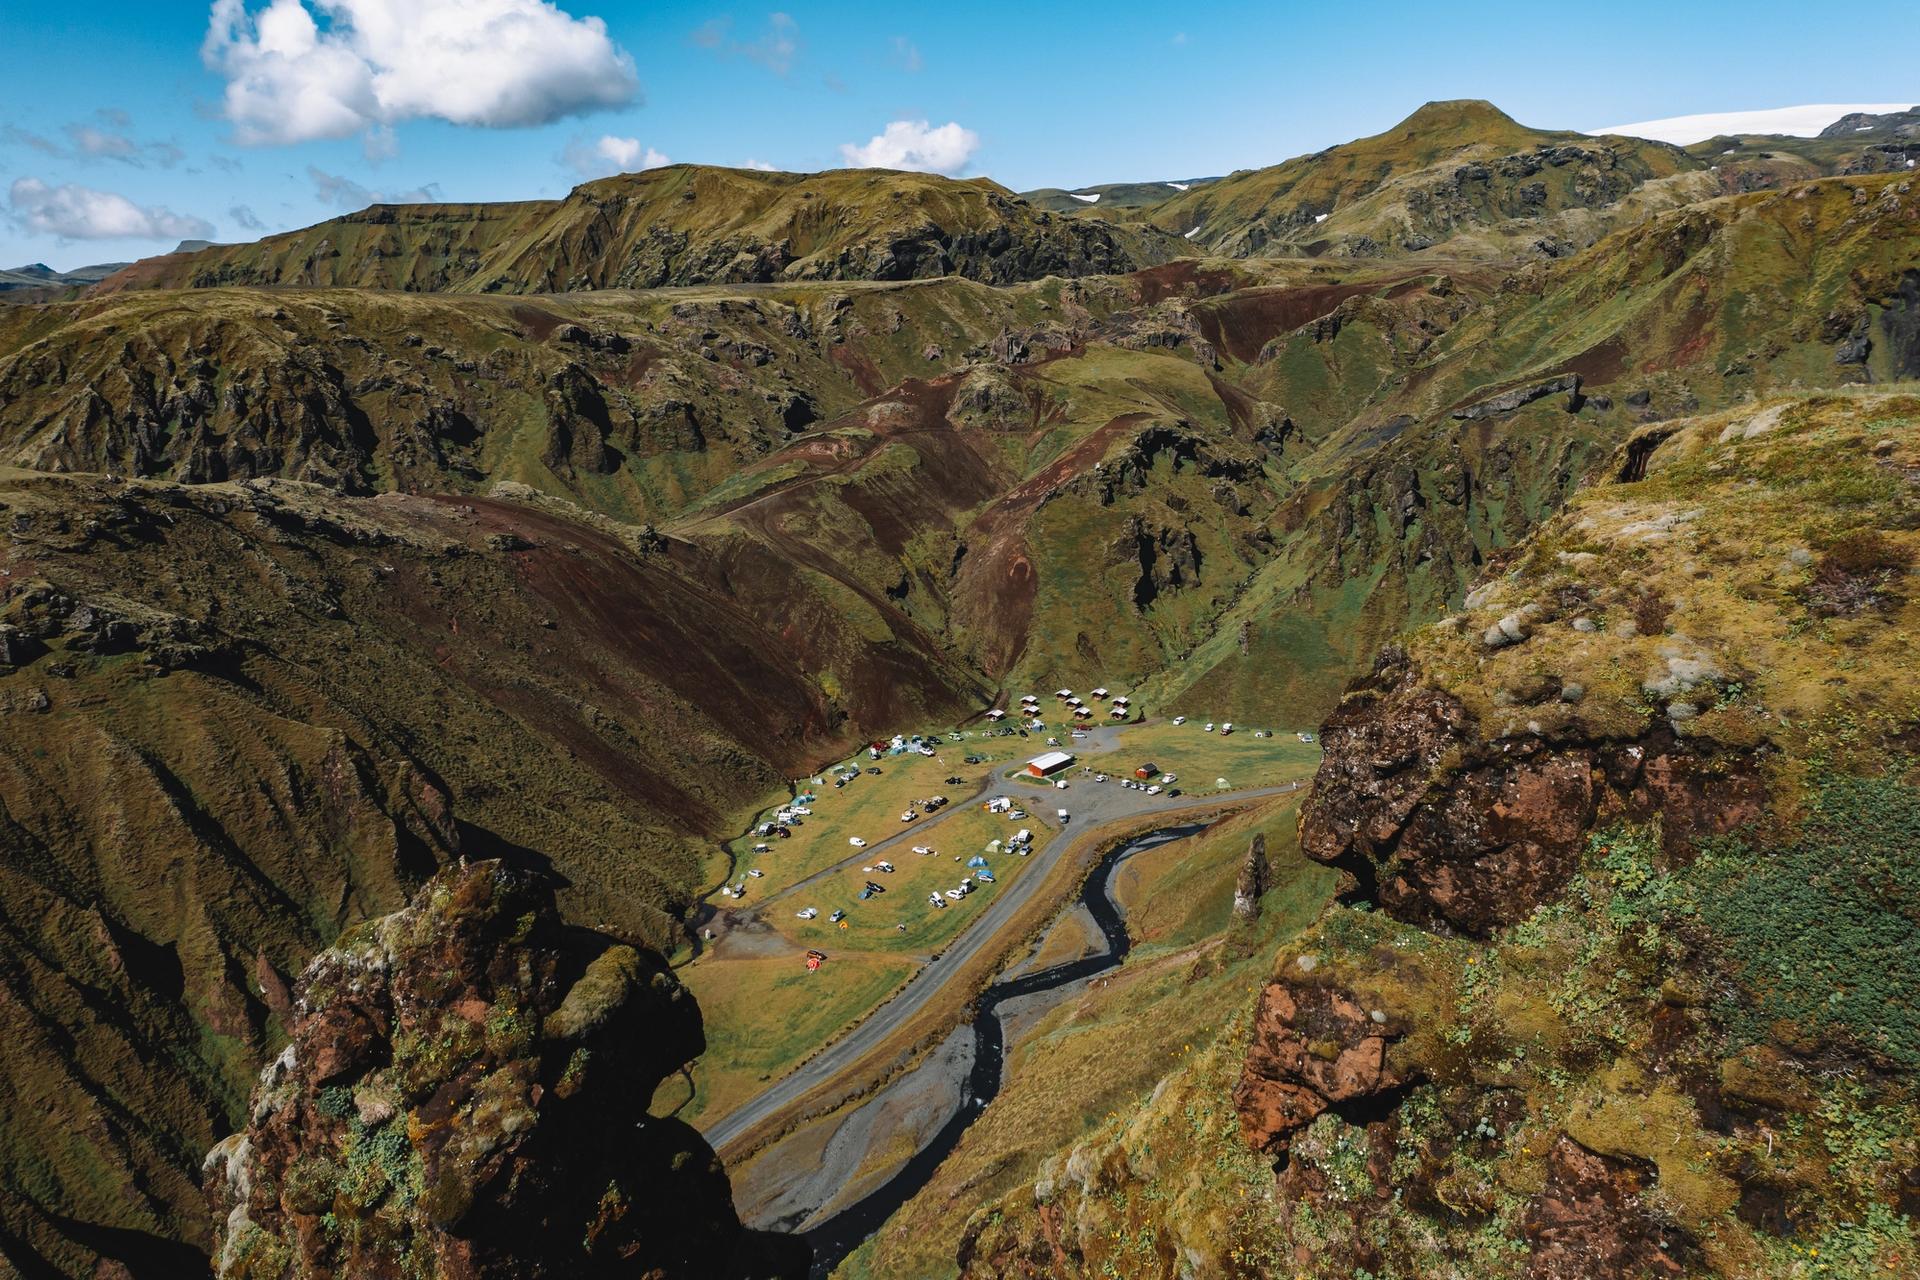 The sheltered canyon of Þakgil Camping Ground.